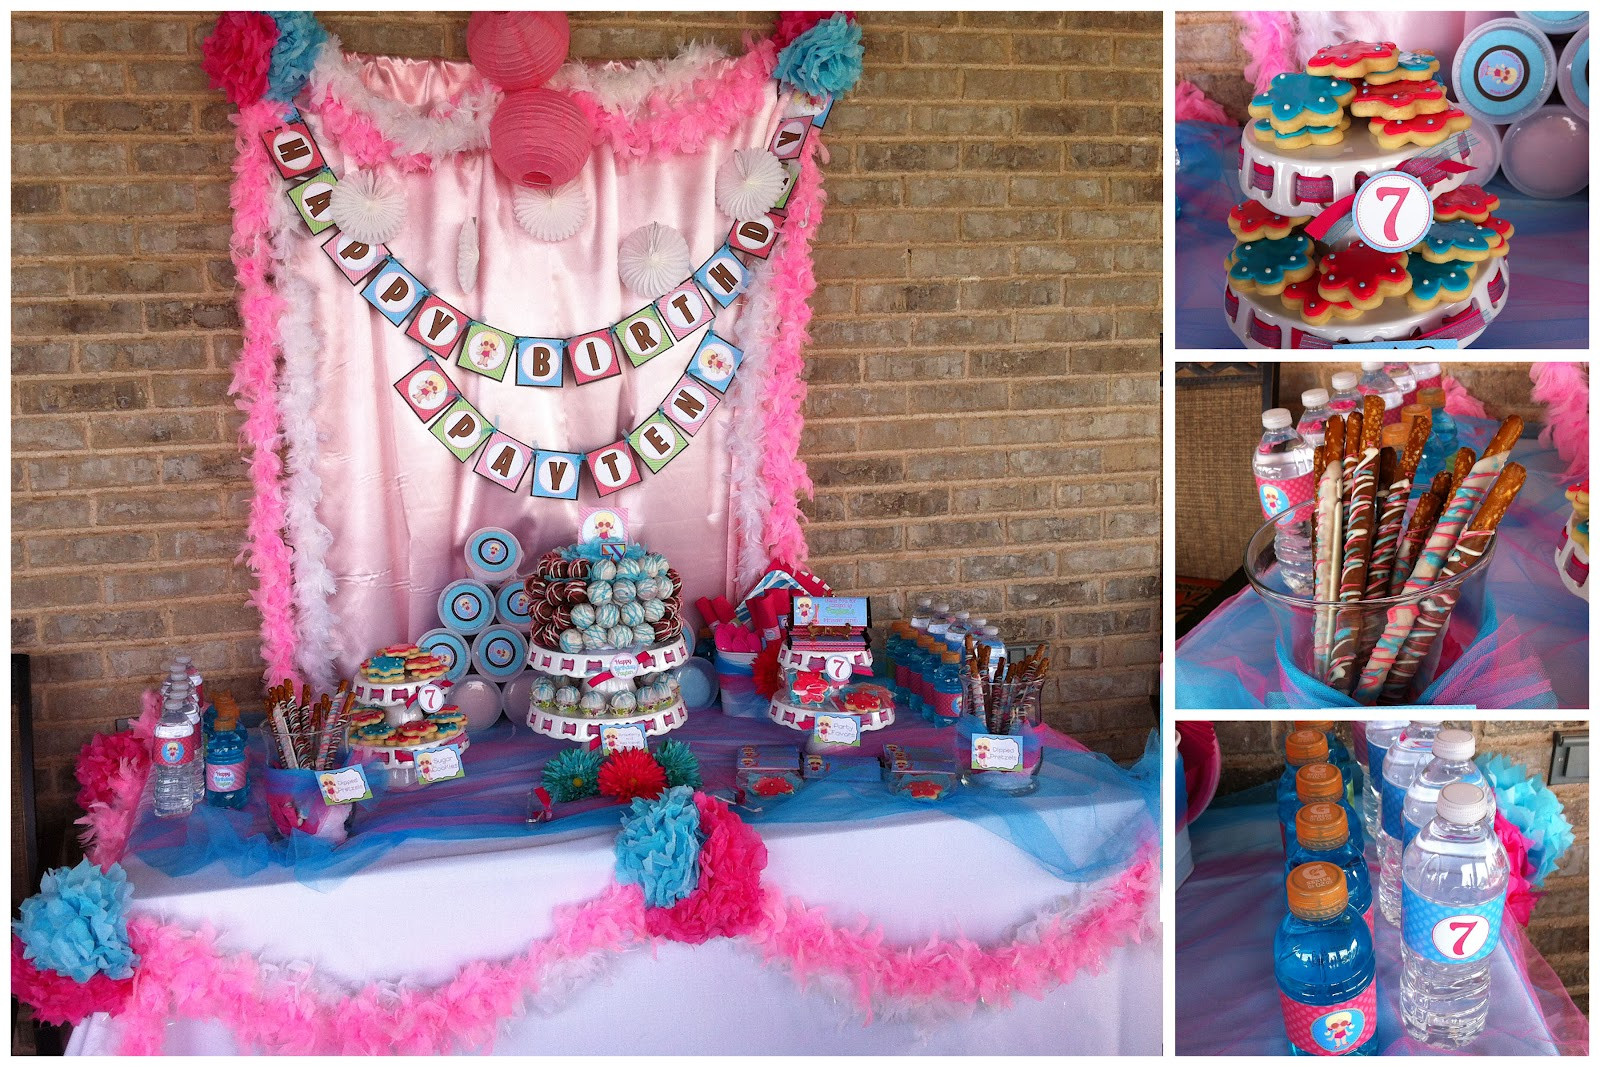 Sweet Sixteen Pool Party Ideas
 Sweet Shindigs Birthday Day Pool Party Dessert Table